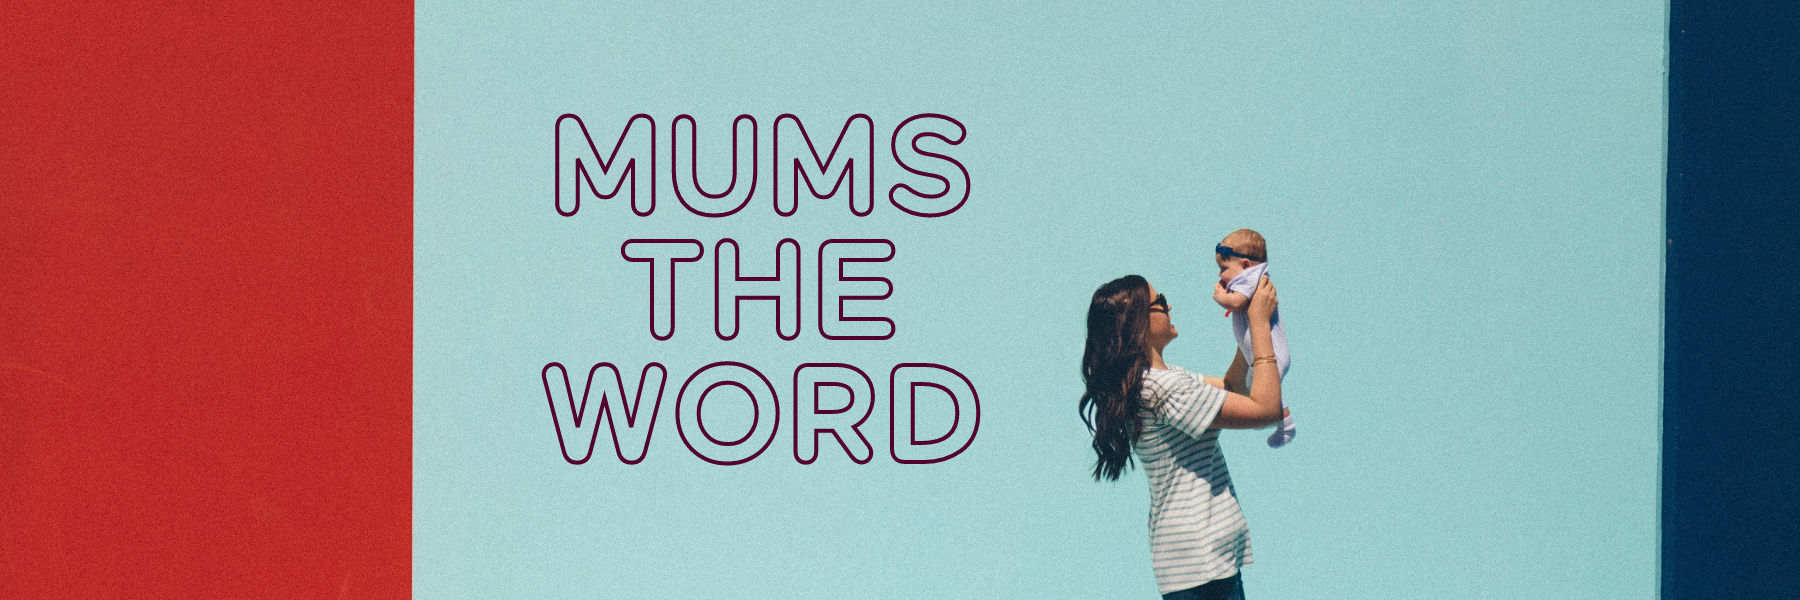 Mums Know Best: Period Care Guide